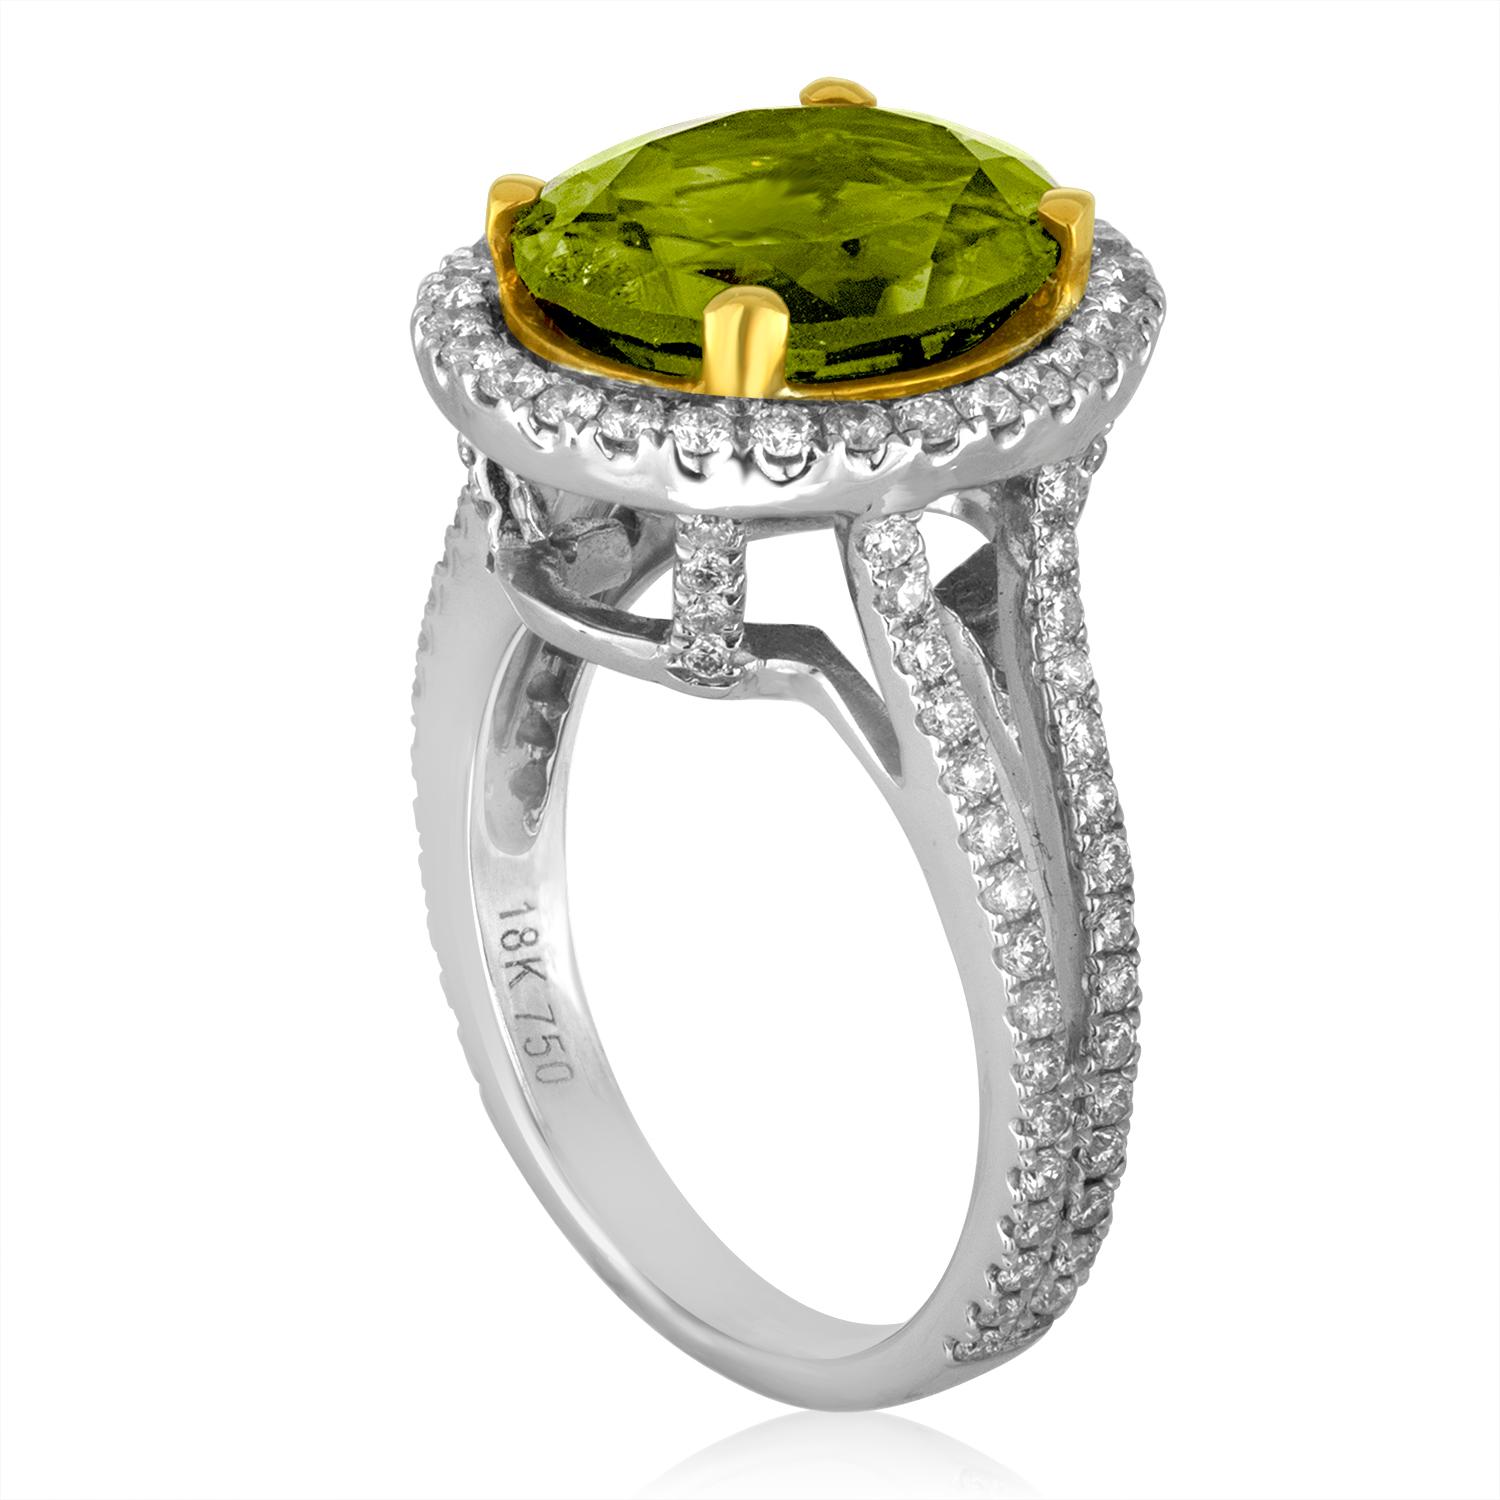 Beautiful Peridot Stone set in a Diamond Split Shank Halo Setting
The ring is 18K White & Yellow Gold
There is 1.00 Carat in Diamonds F VS/SI
The center stone is an Oval Peridot 5.07 Carats
The ring is a size 5.75, sizable
The ring weighs 7.3 grams